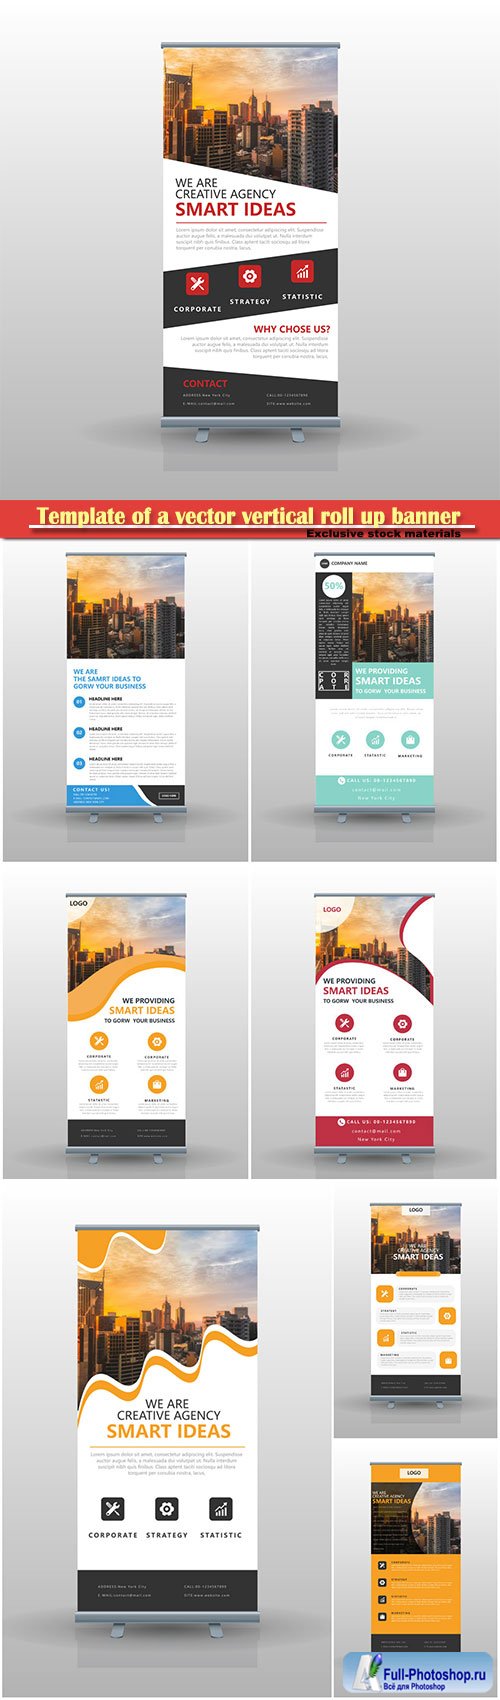 Template of a vector vertical roll up banner for business #4